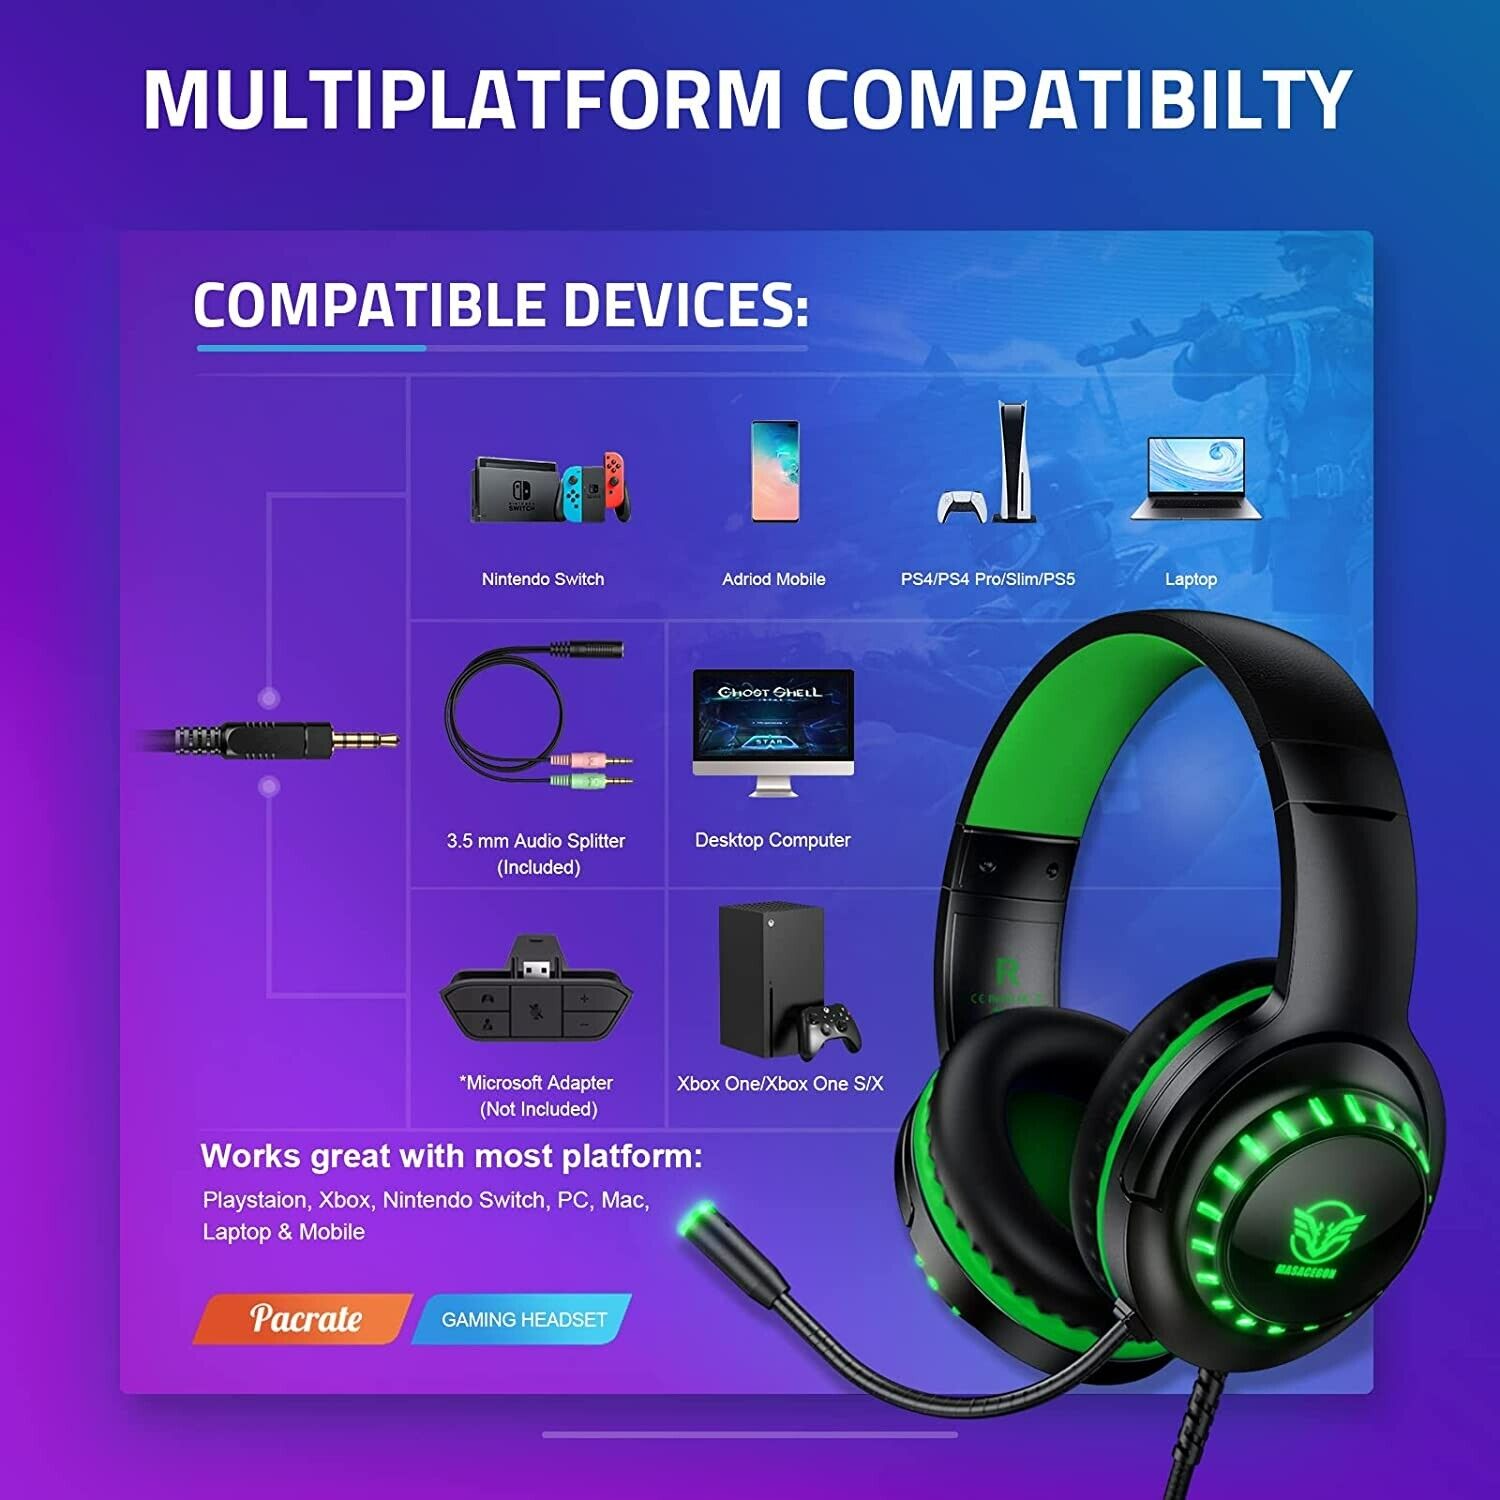  Pacrate Gaming Headset for PS5/PS4/Xbox One/Nintendo